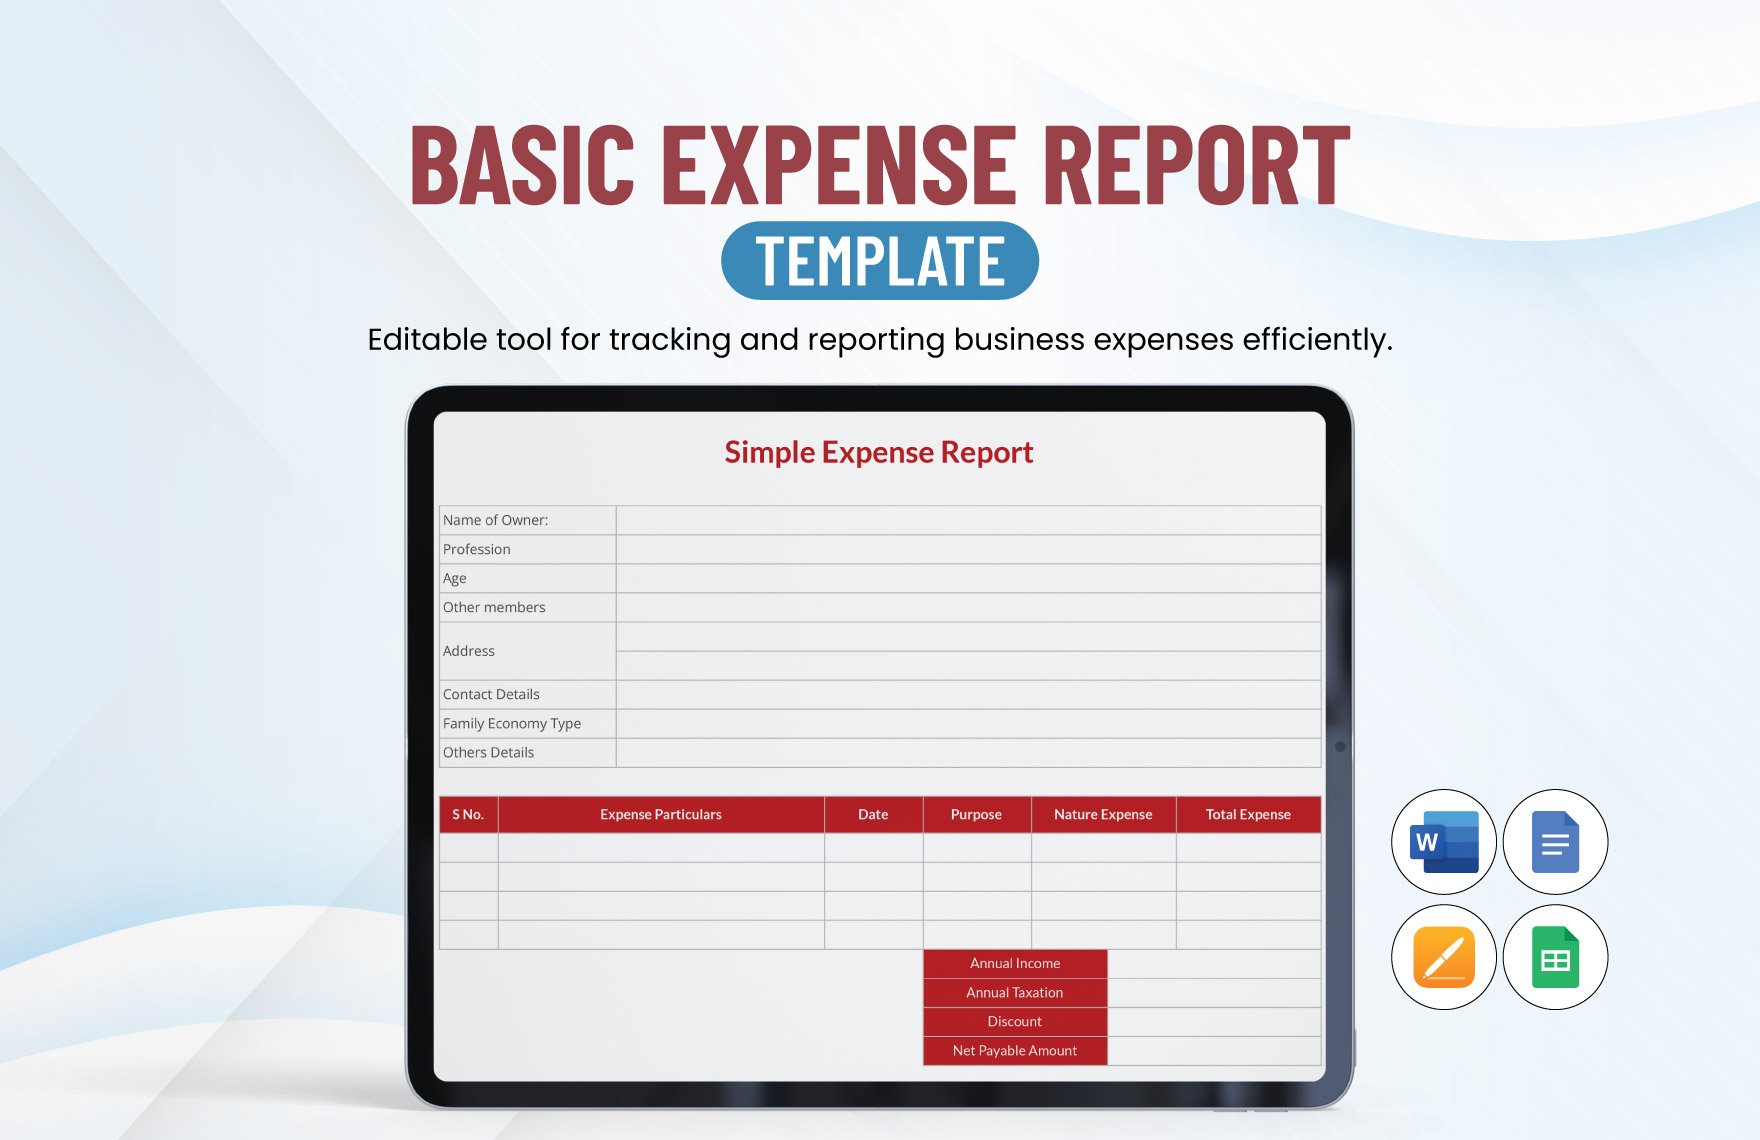 Basic Expense Report Template in Word, Google Docs, Google Sheets, Apple Pages